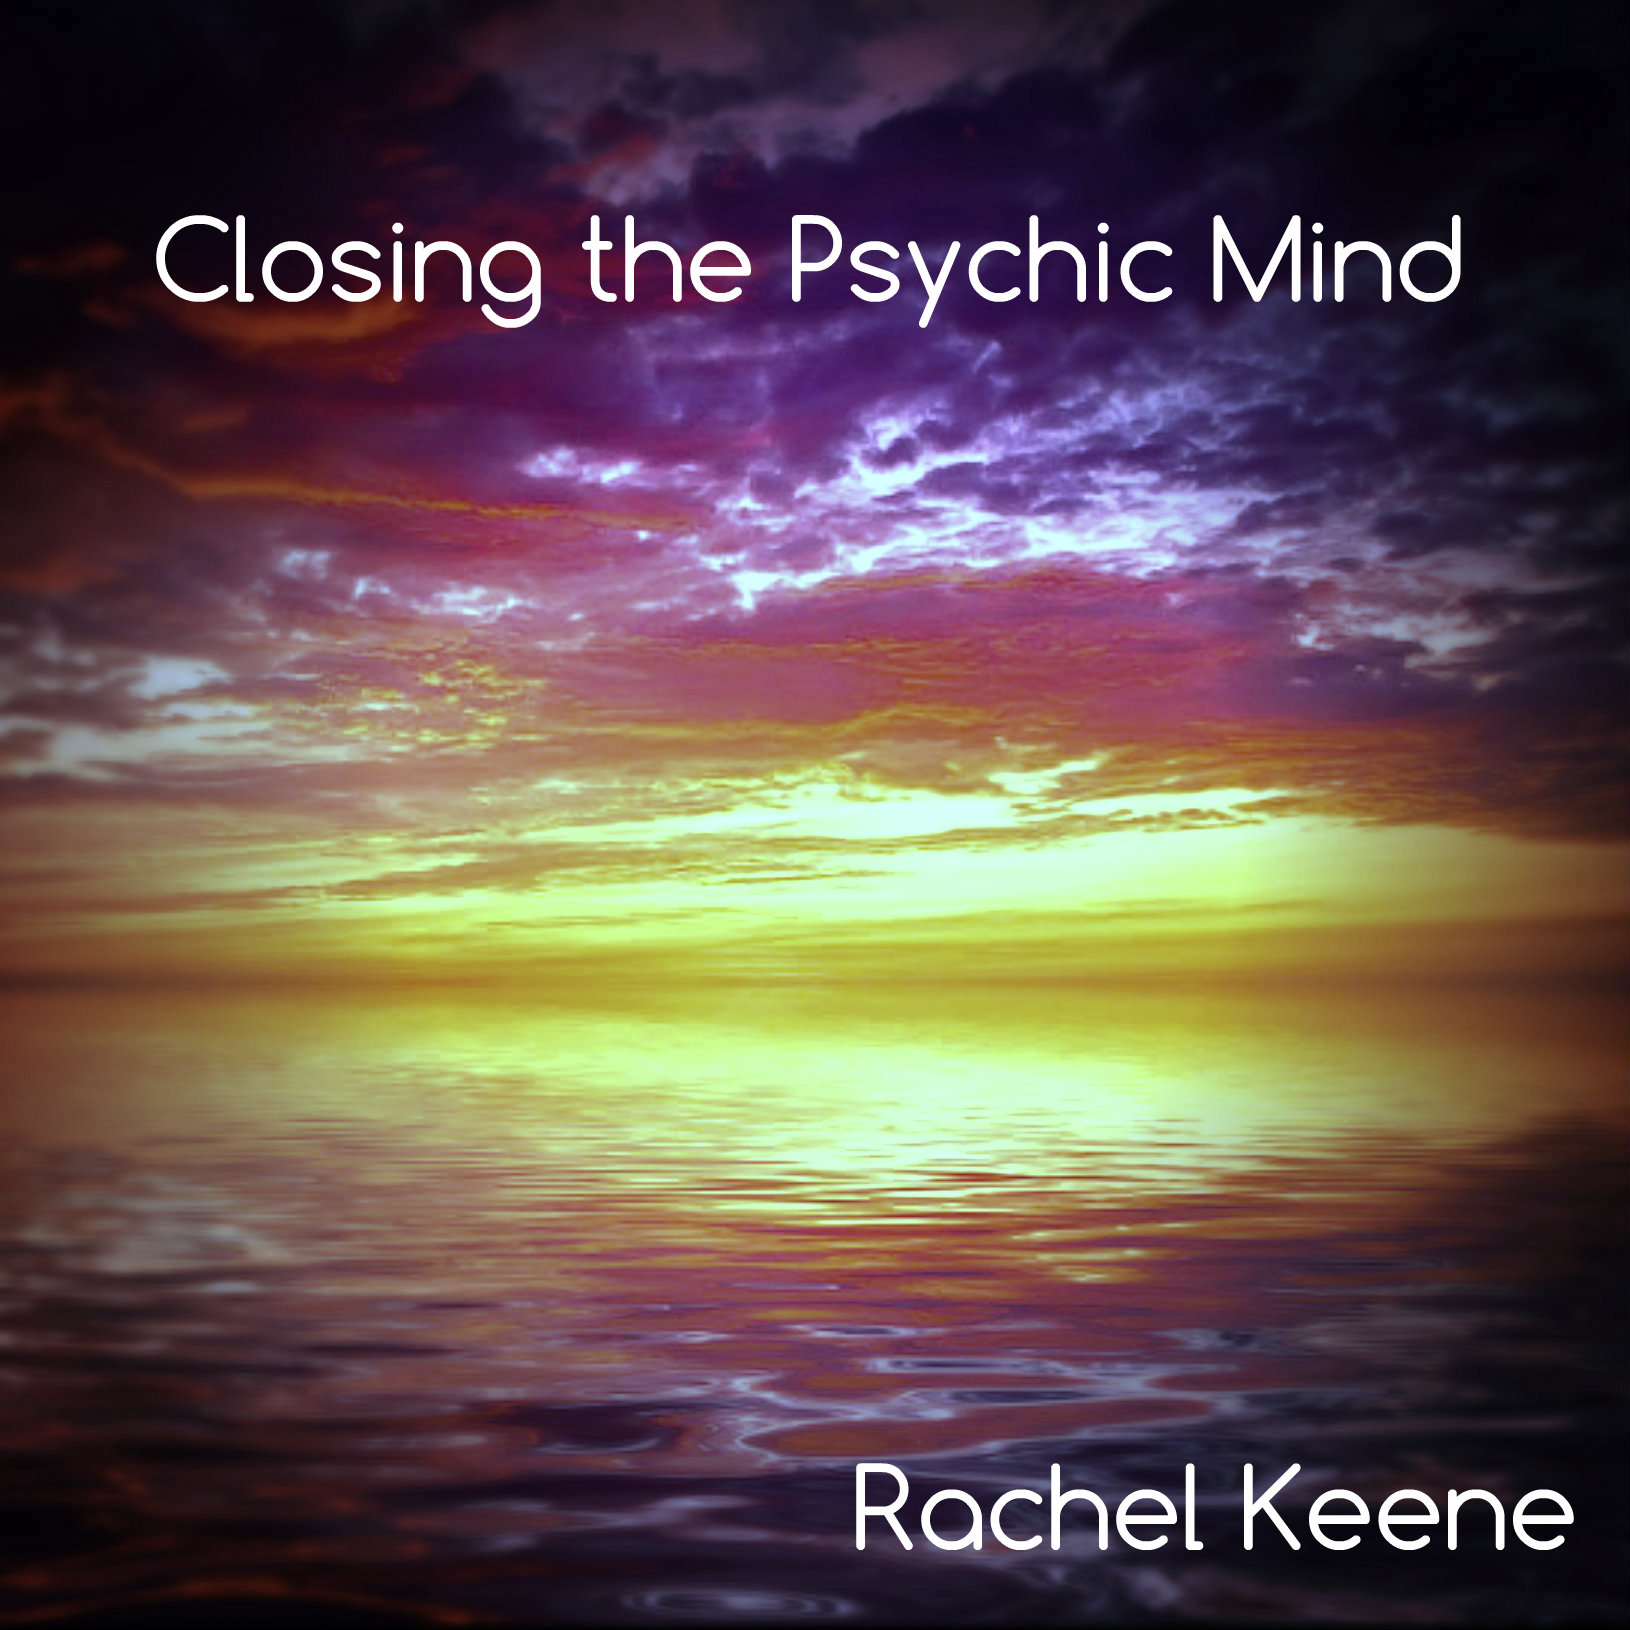 Closing the Psychic Mind